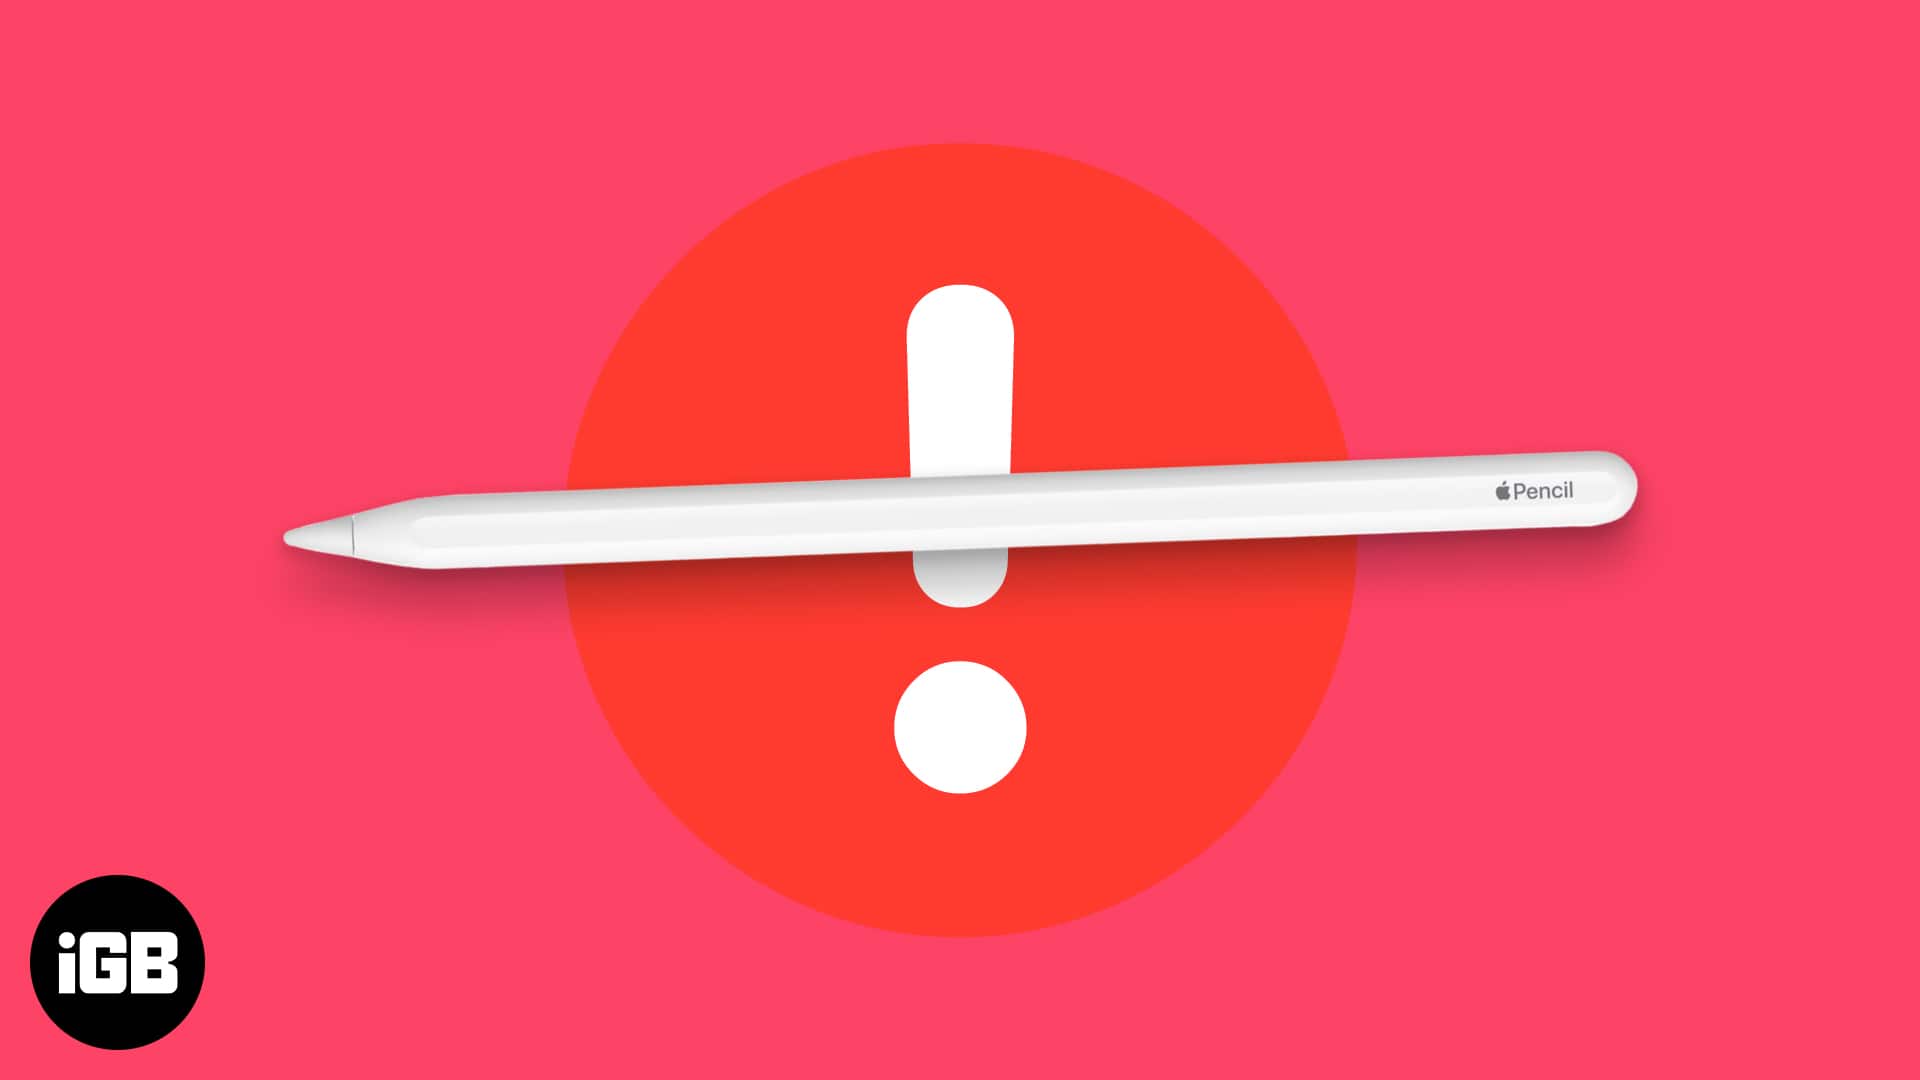 Apple Pencil not working? Learn how to fix it!